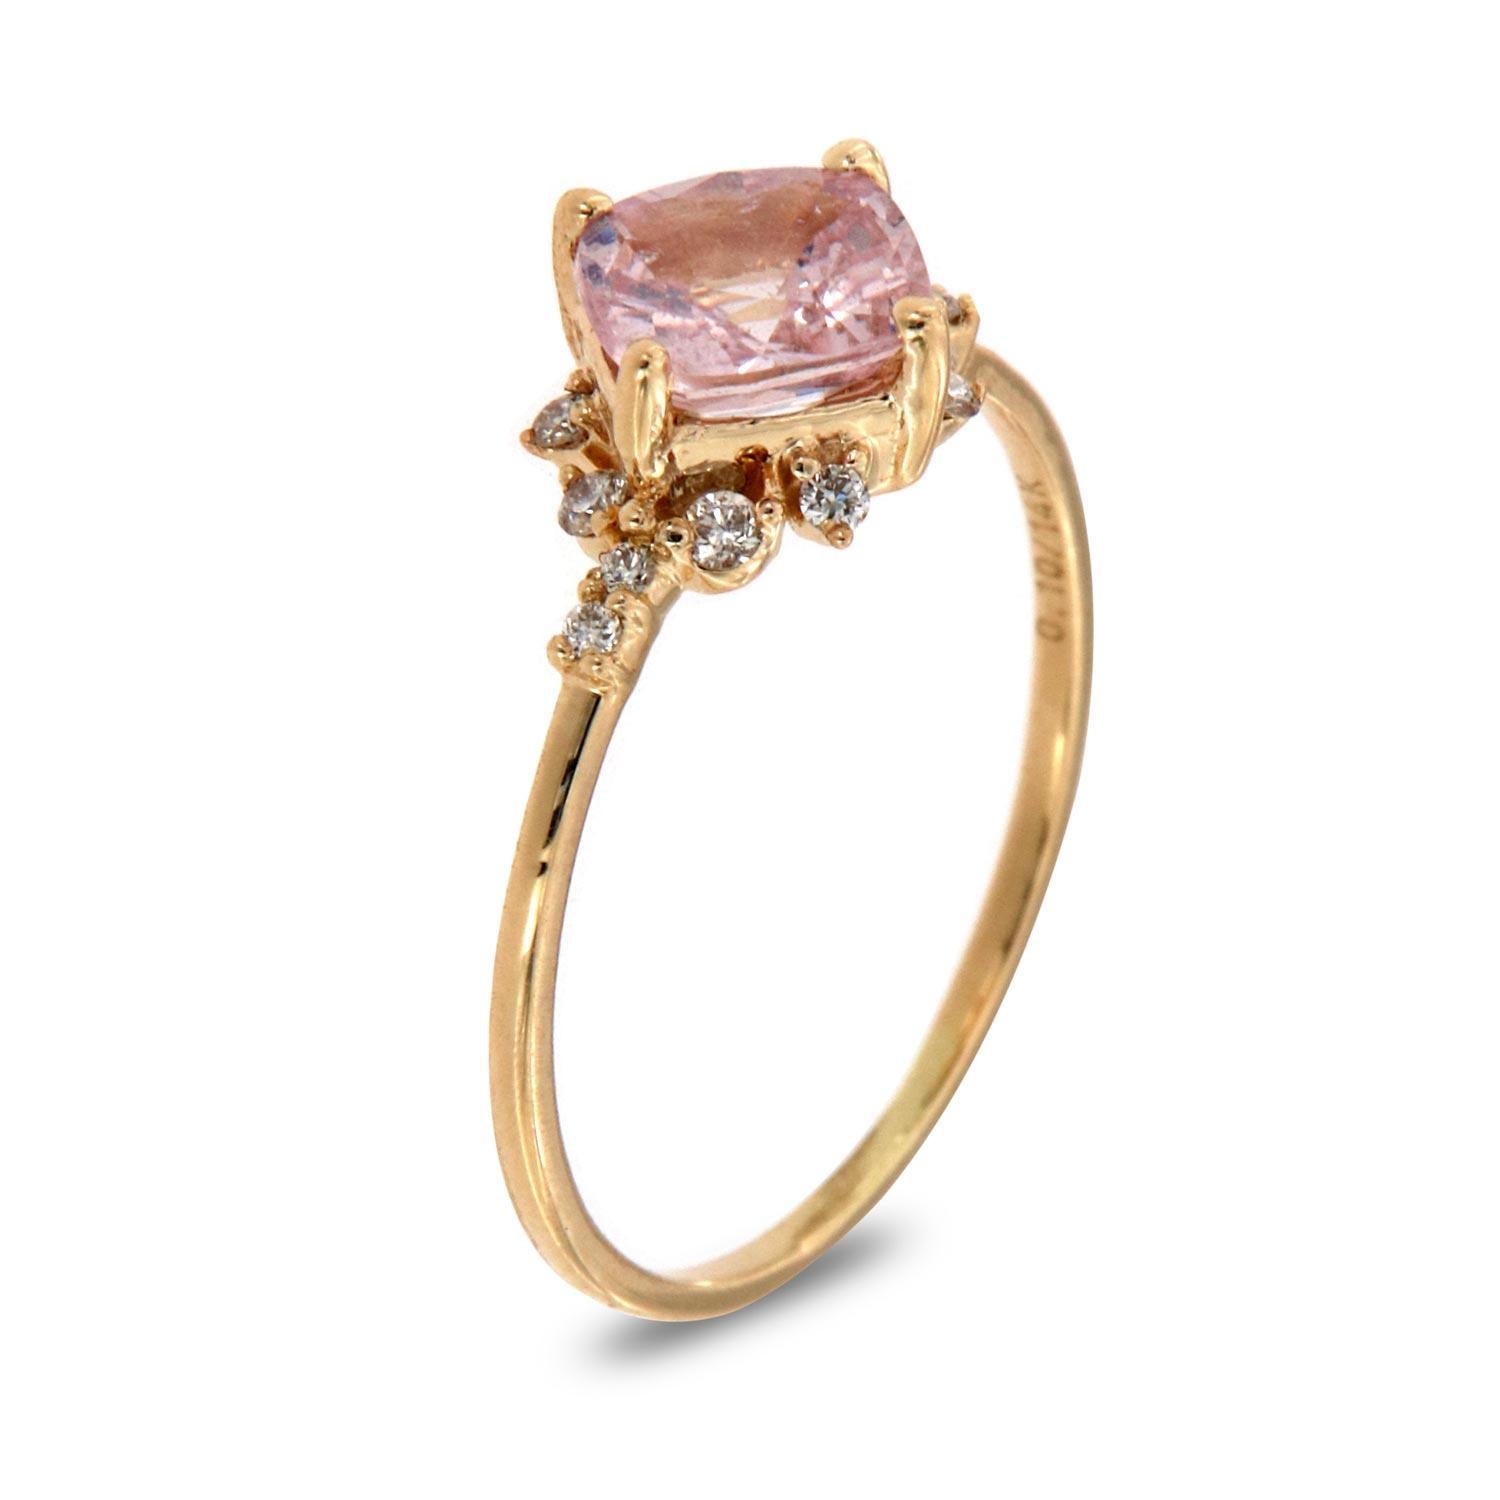 This petite fashion ring is impressive in its vintage appeal, featuring a natural None Heated GIA Certified peach/pink cushion shape sapphire, accented with round brilliant diamonds. Experience the difference in person!

Product details: 

Center